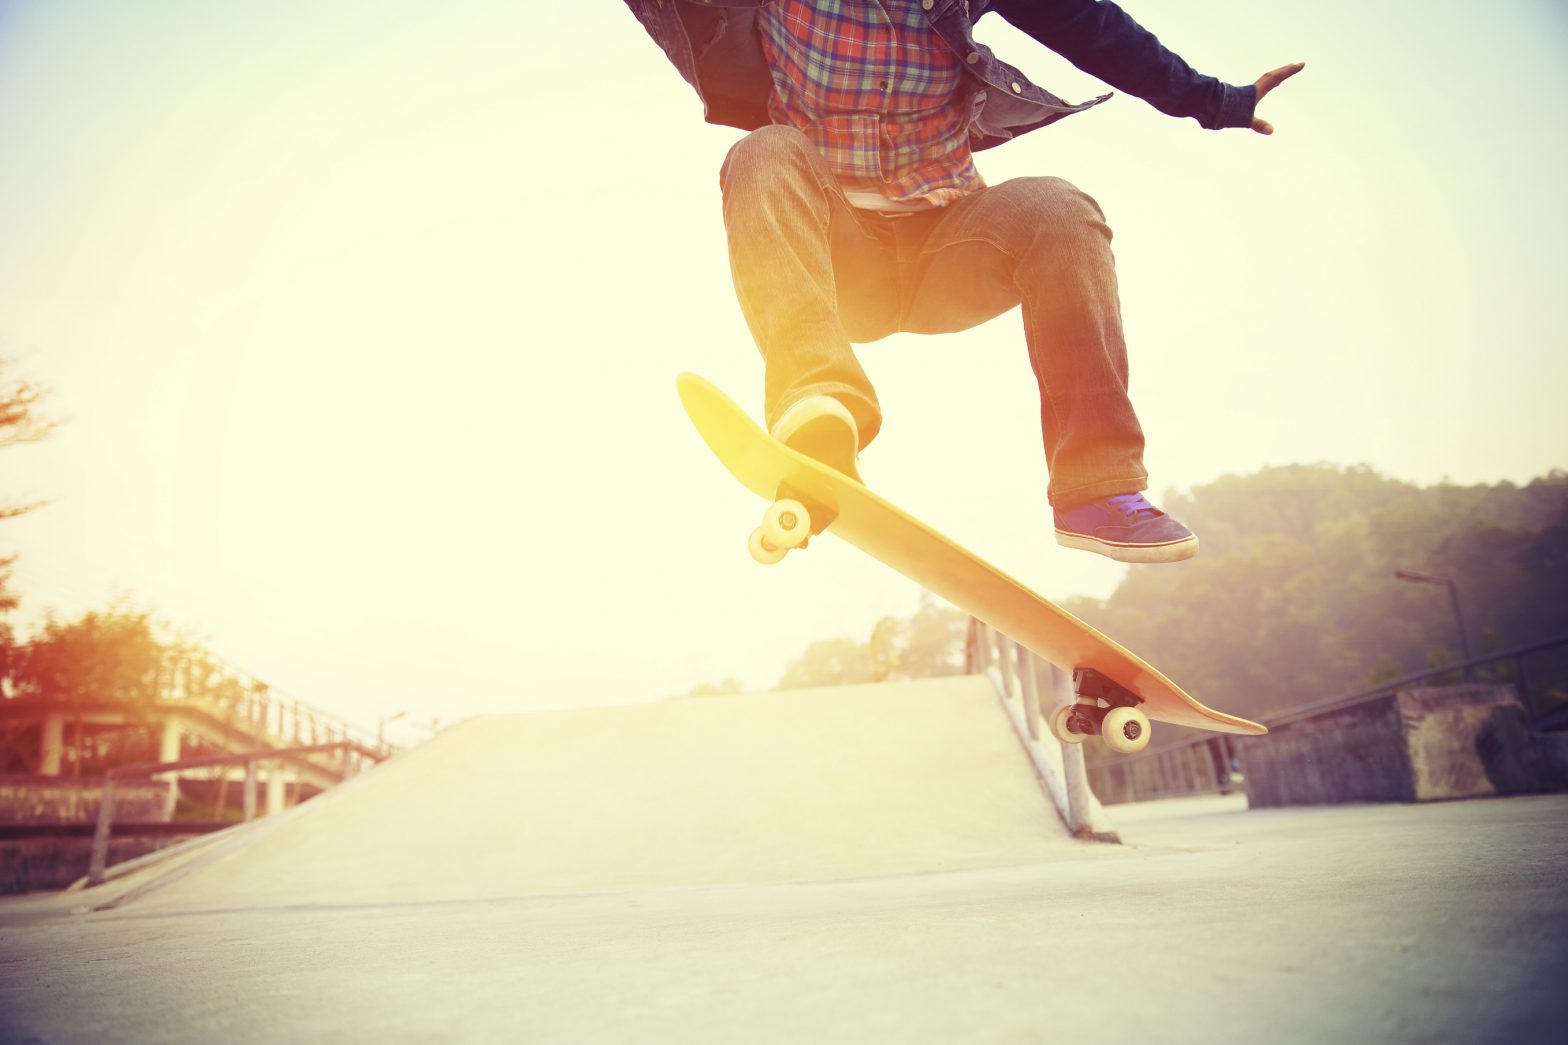 What a Skateboarder Taught Me About Advertising on Instagram